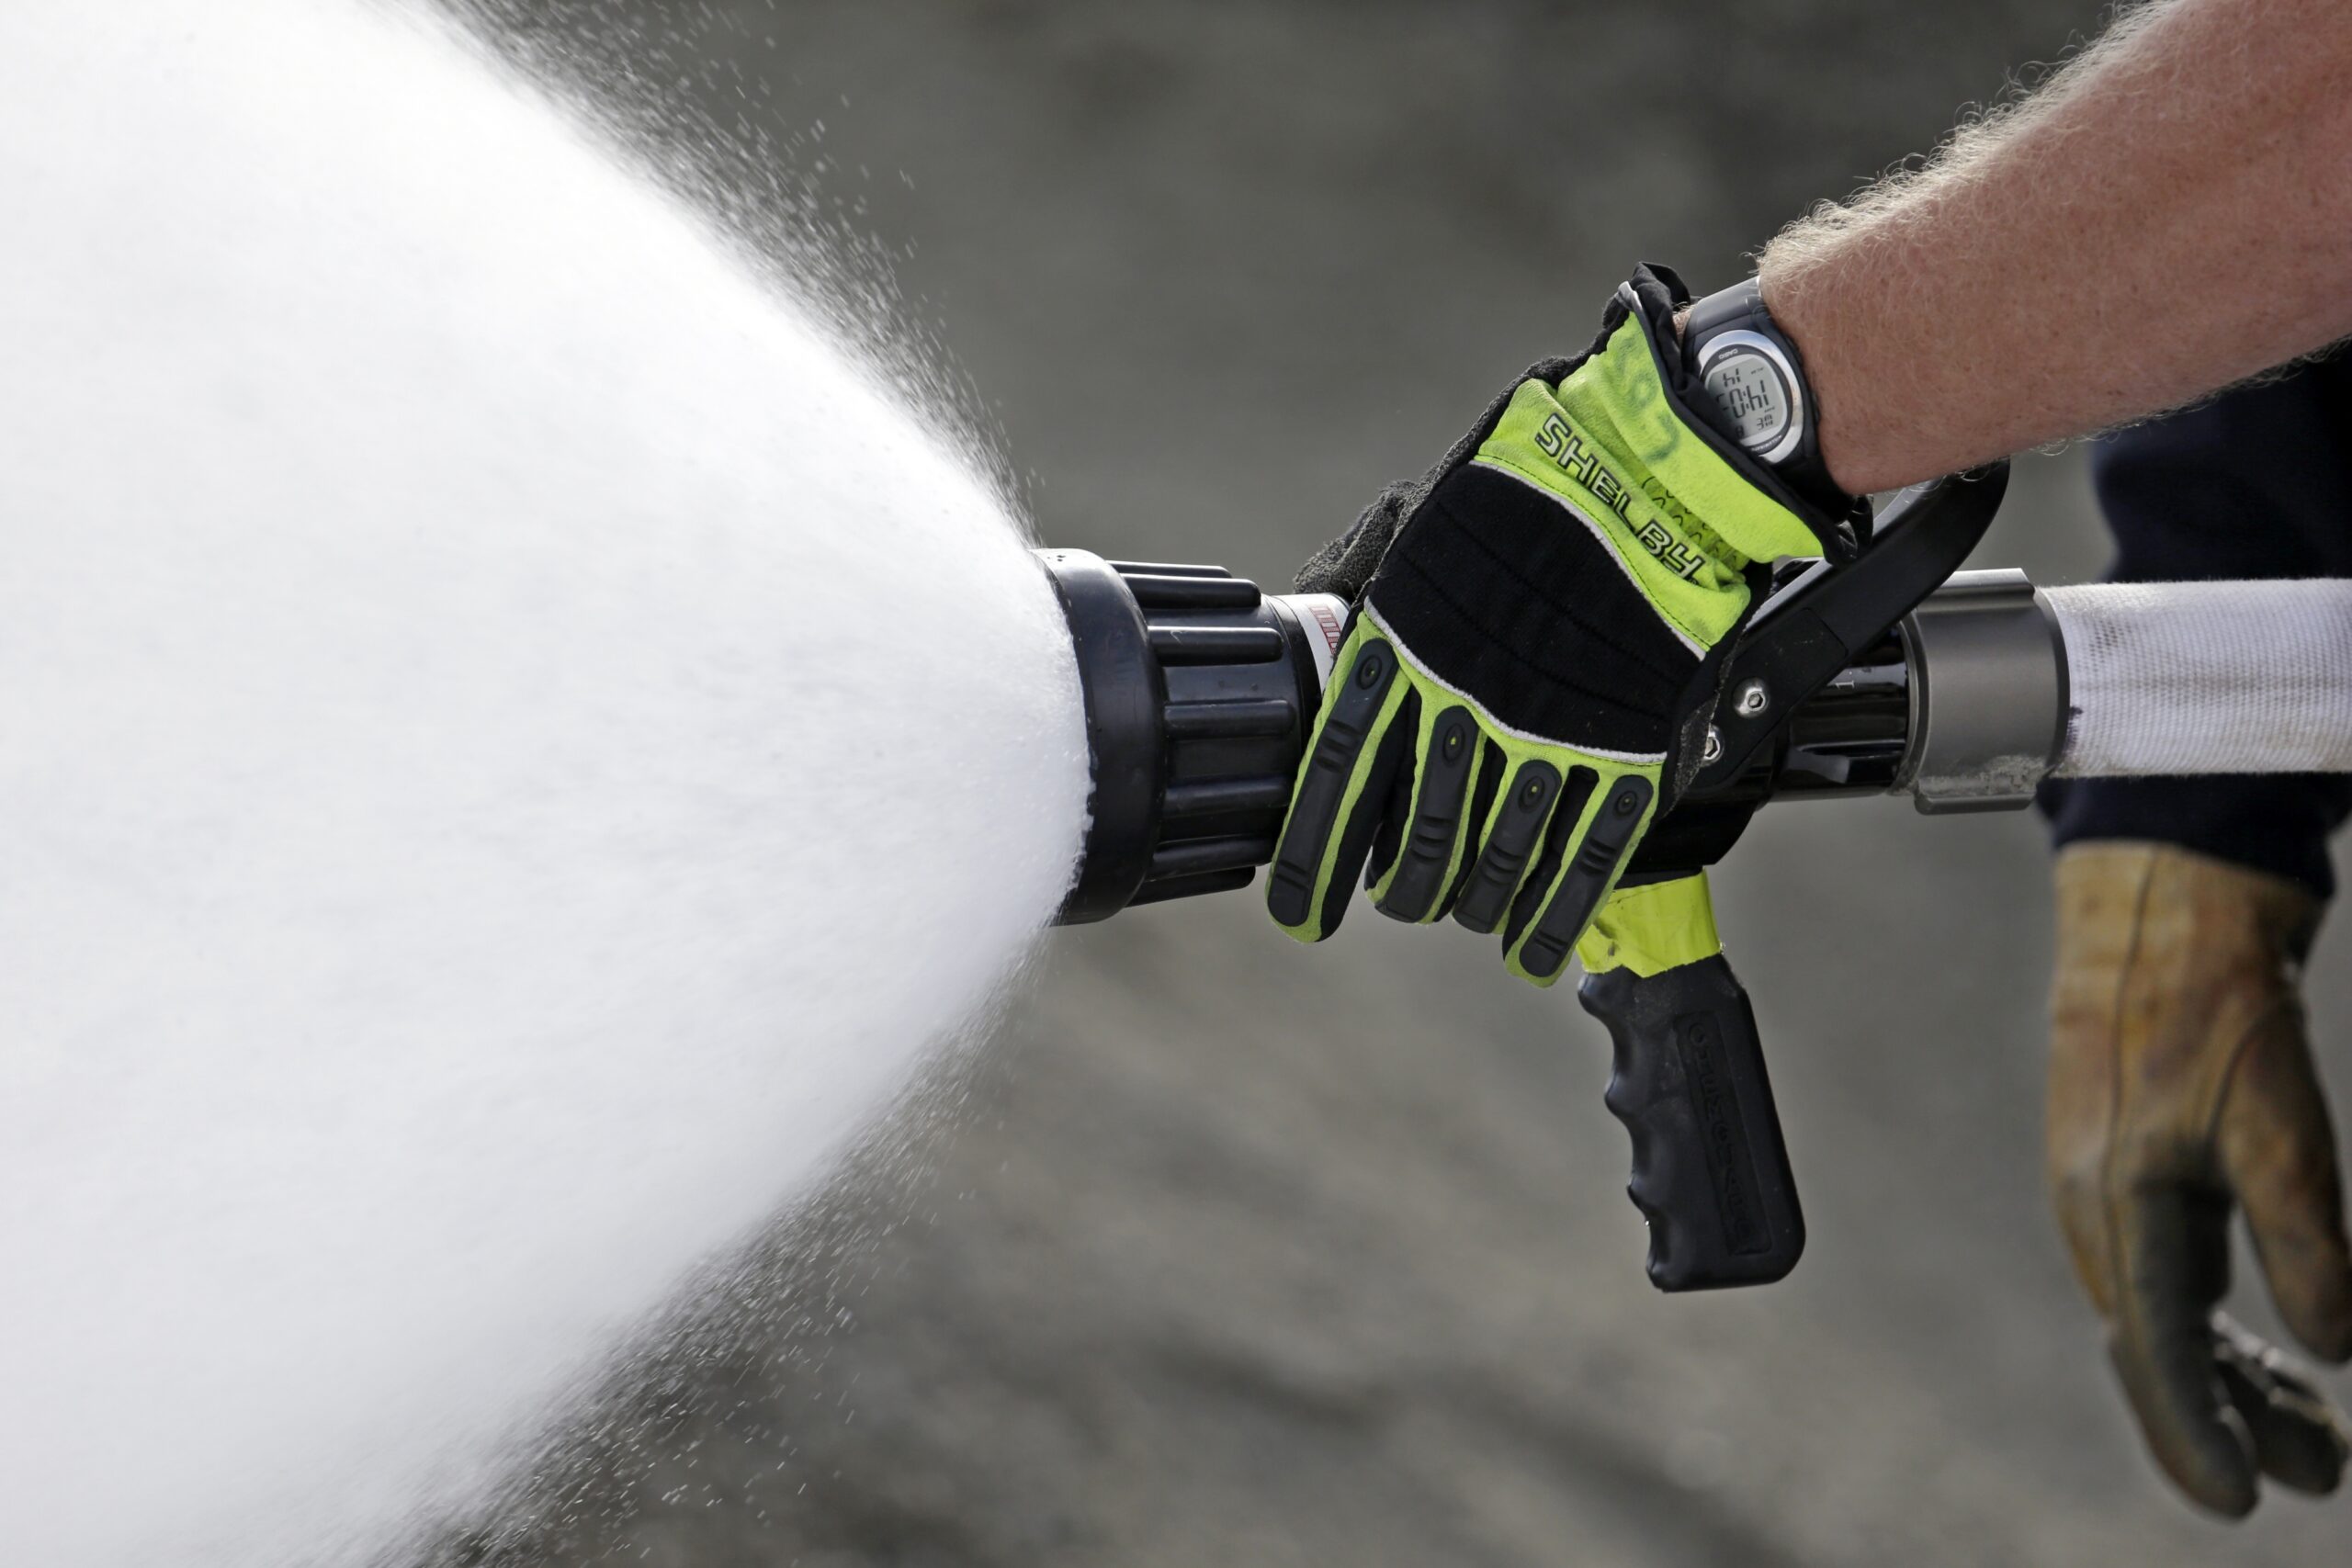 A Seattle firefighter sprays foam during a specialized training session